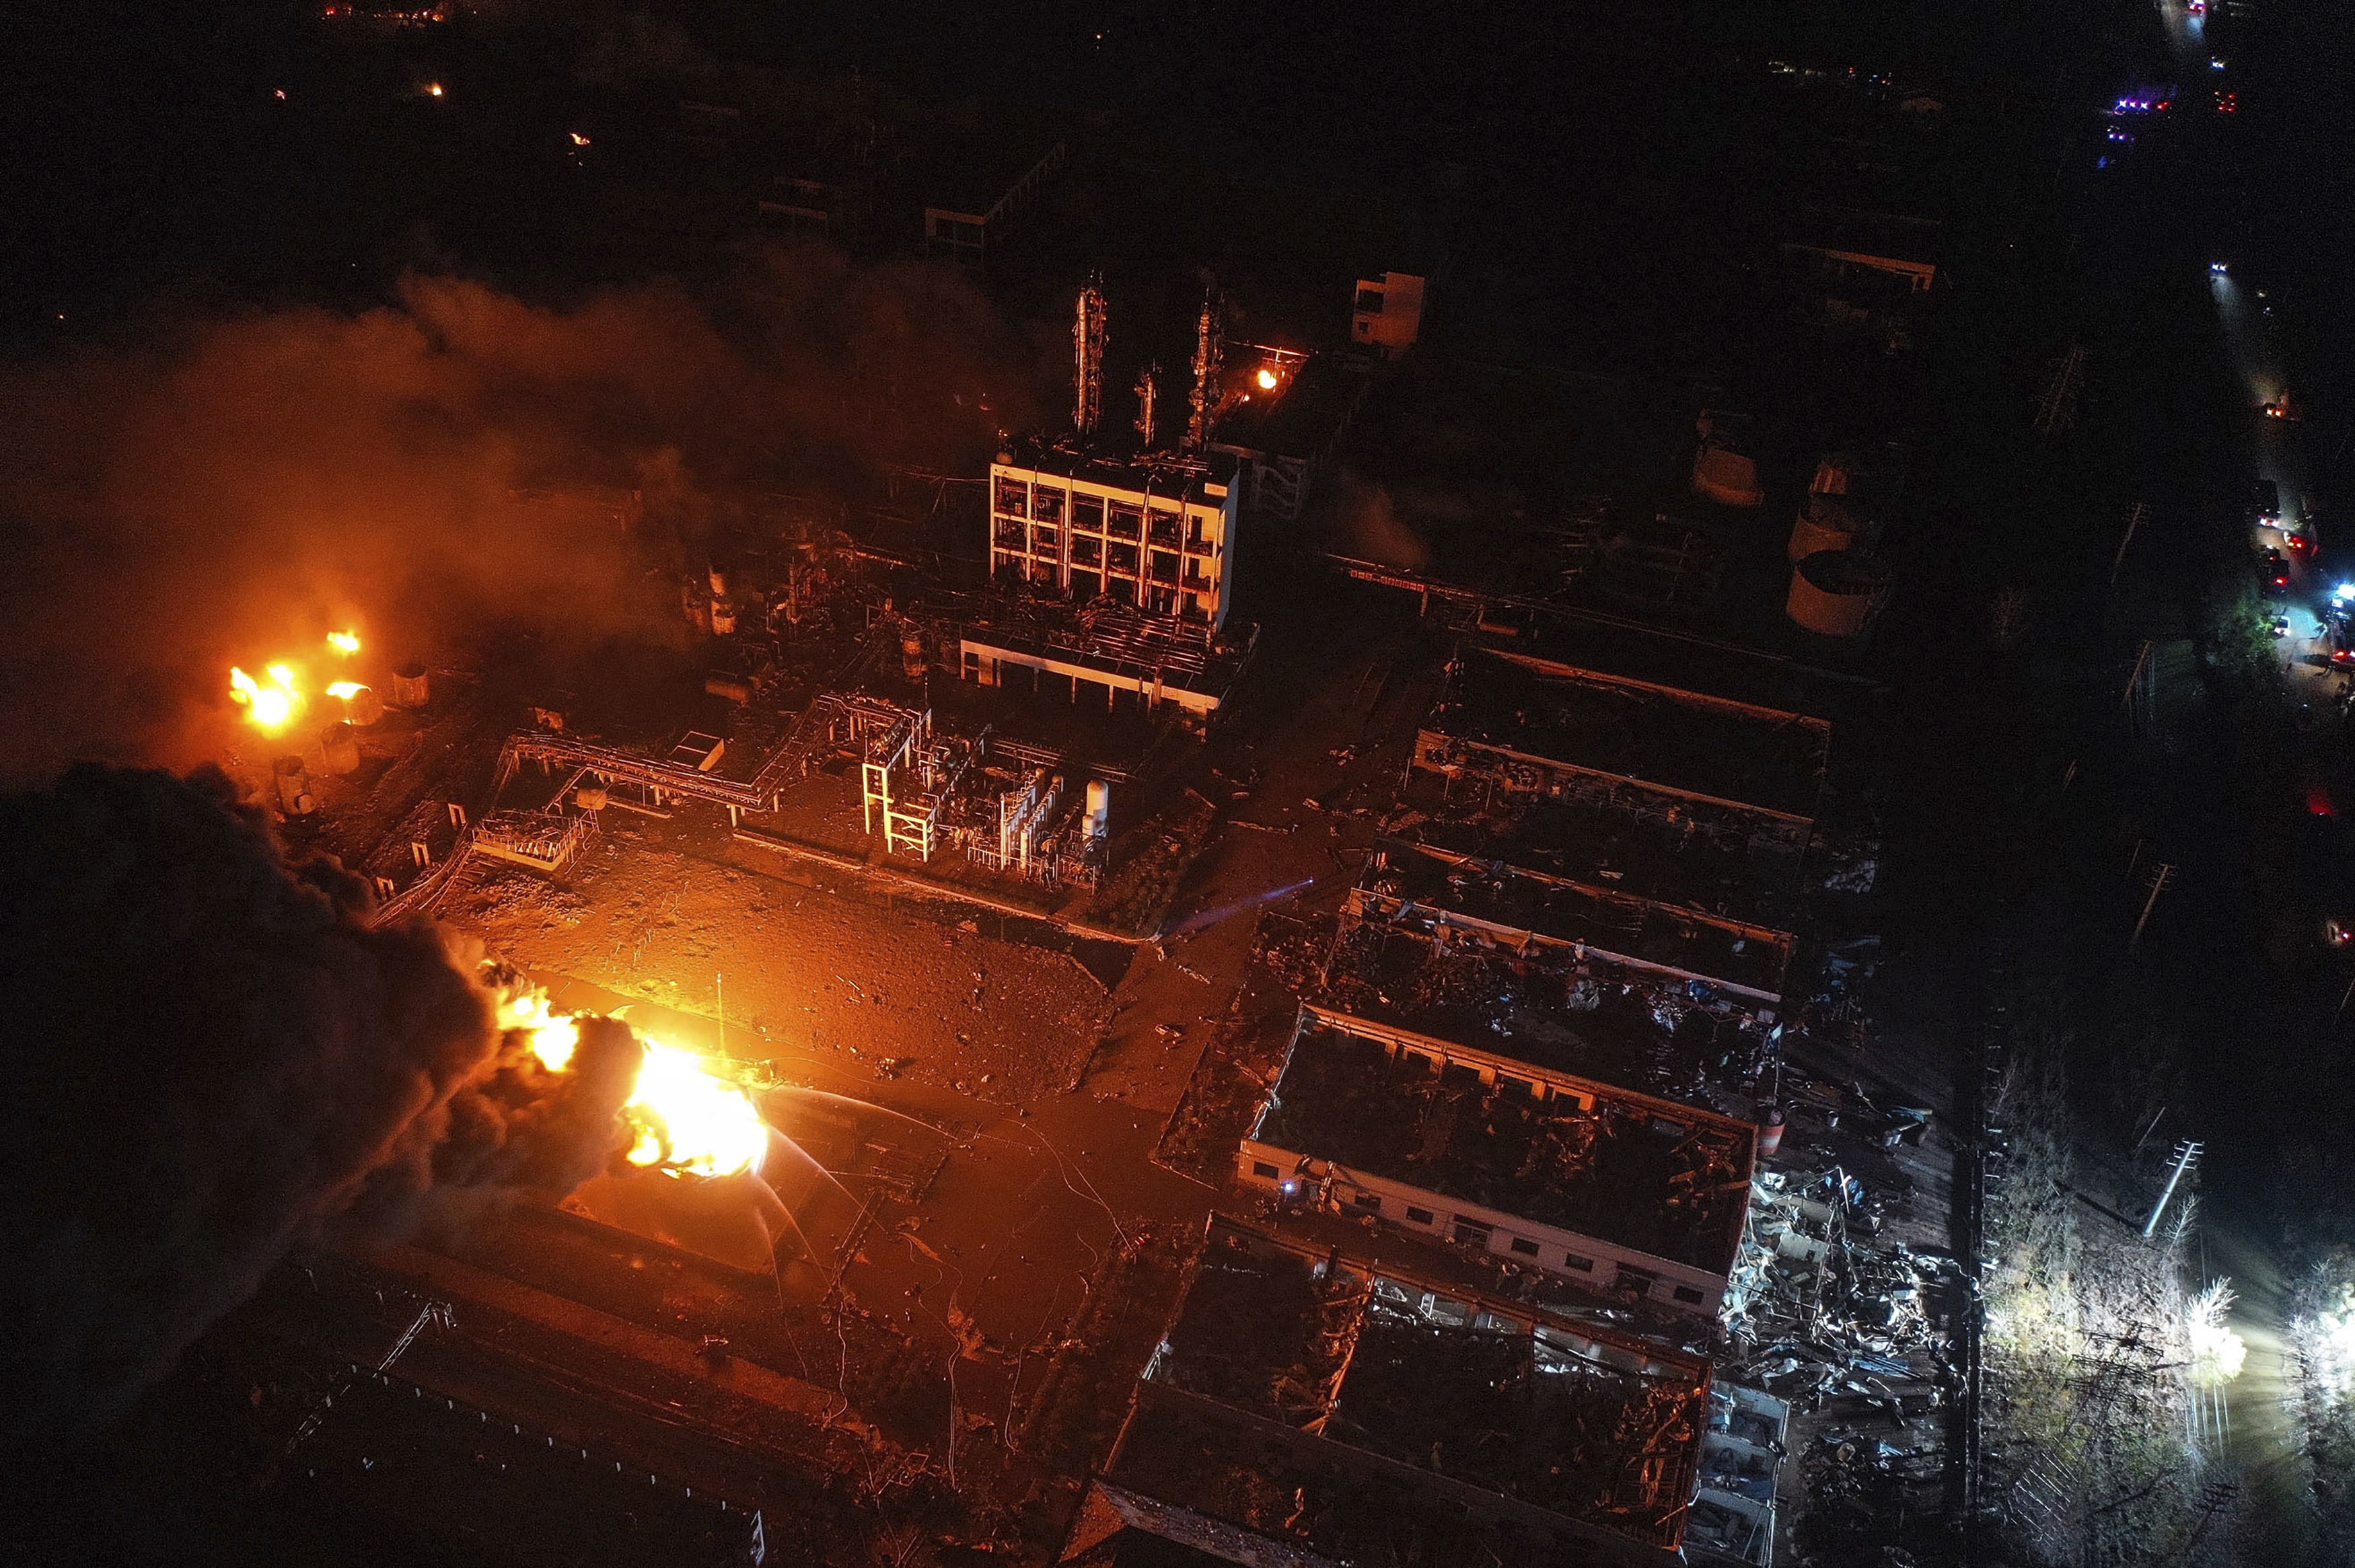 Aerial photo released by China's Xinhua News Agency, fires burn at the site of a factory explosion in a chemical industrial park in Xiangshui County of Yancheng in eastern China's Jiangsu province